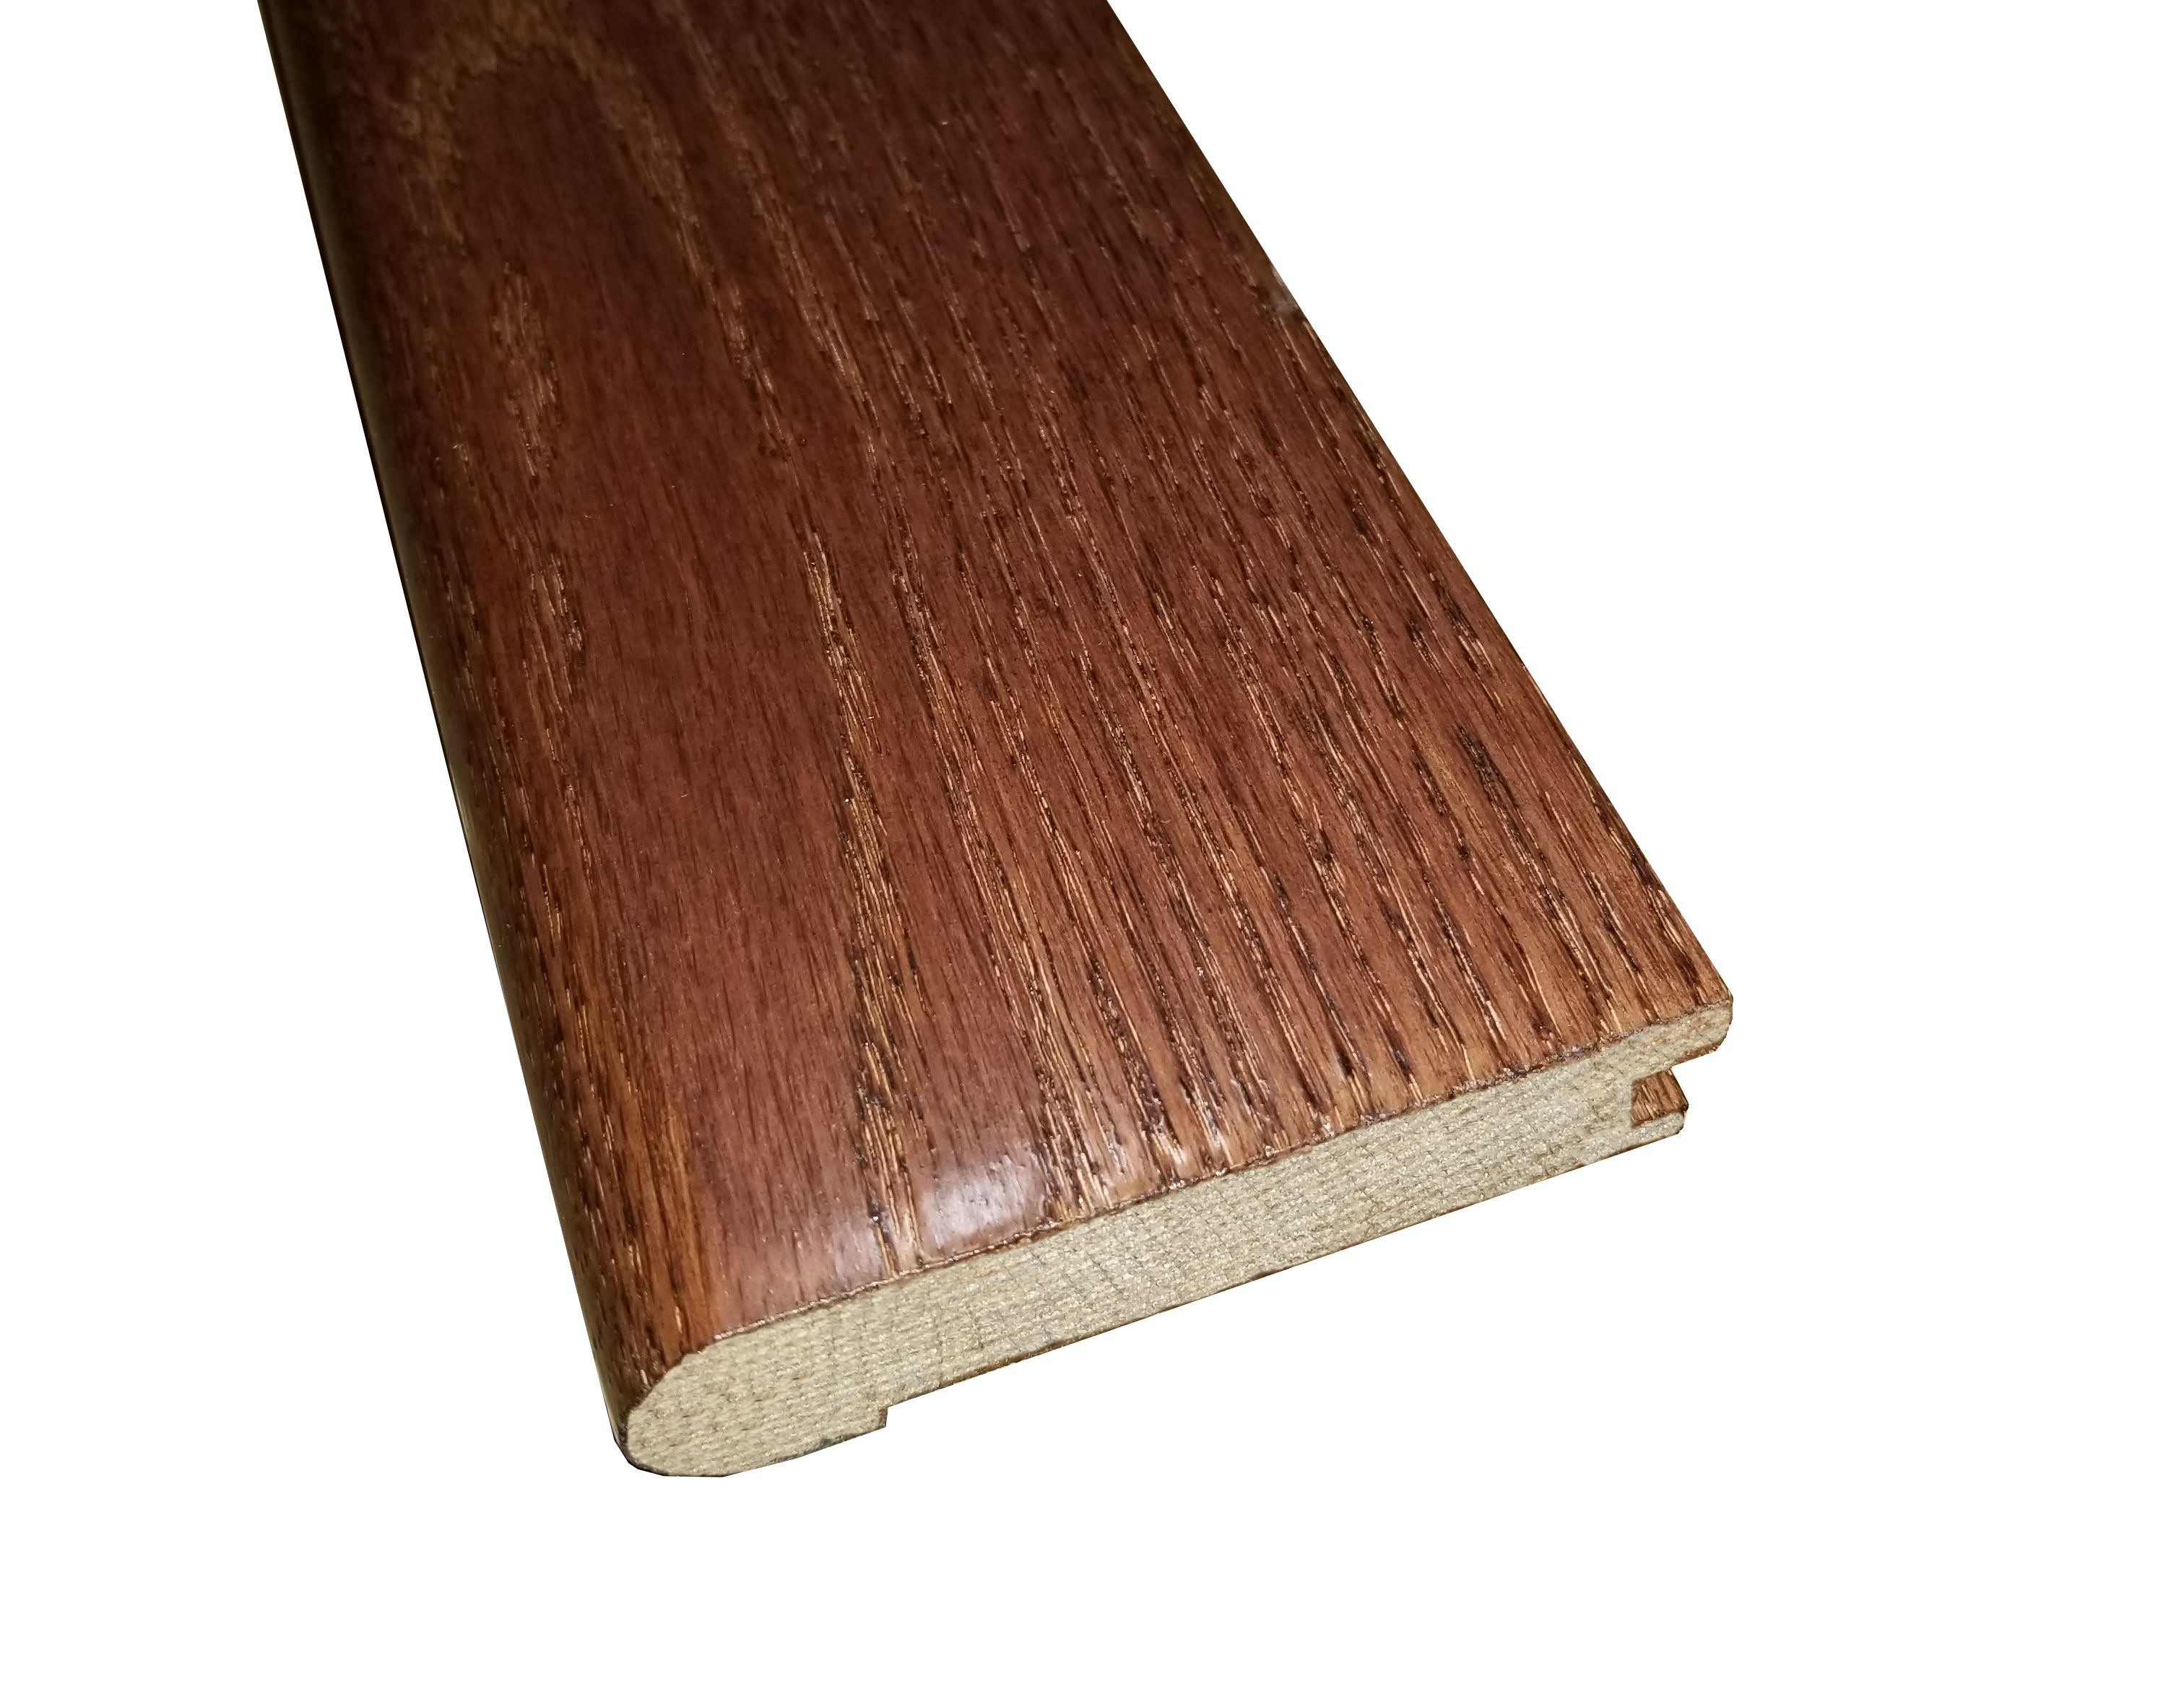 Prefinished Cherry Oak Hardwood 3/4 in thick x 3.125 in wide x 78 in Length Stair Nose